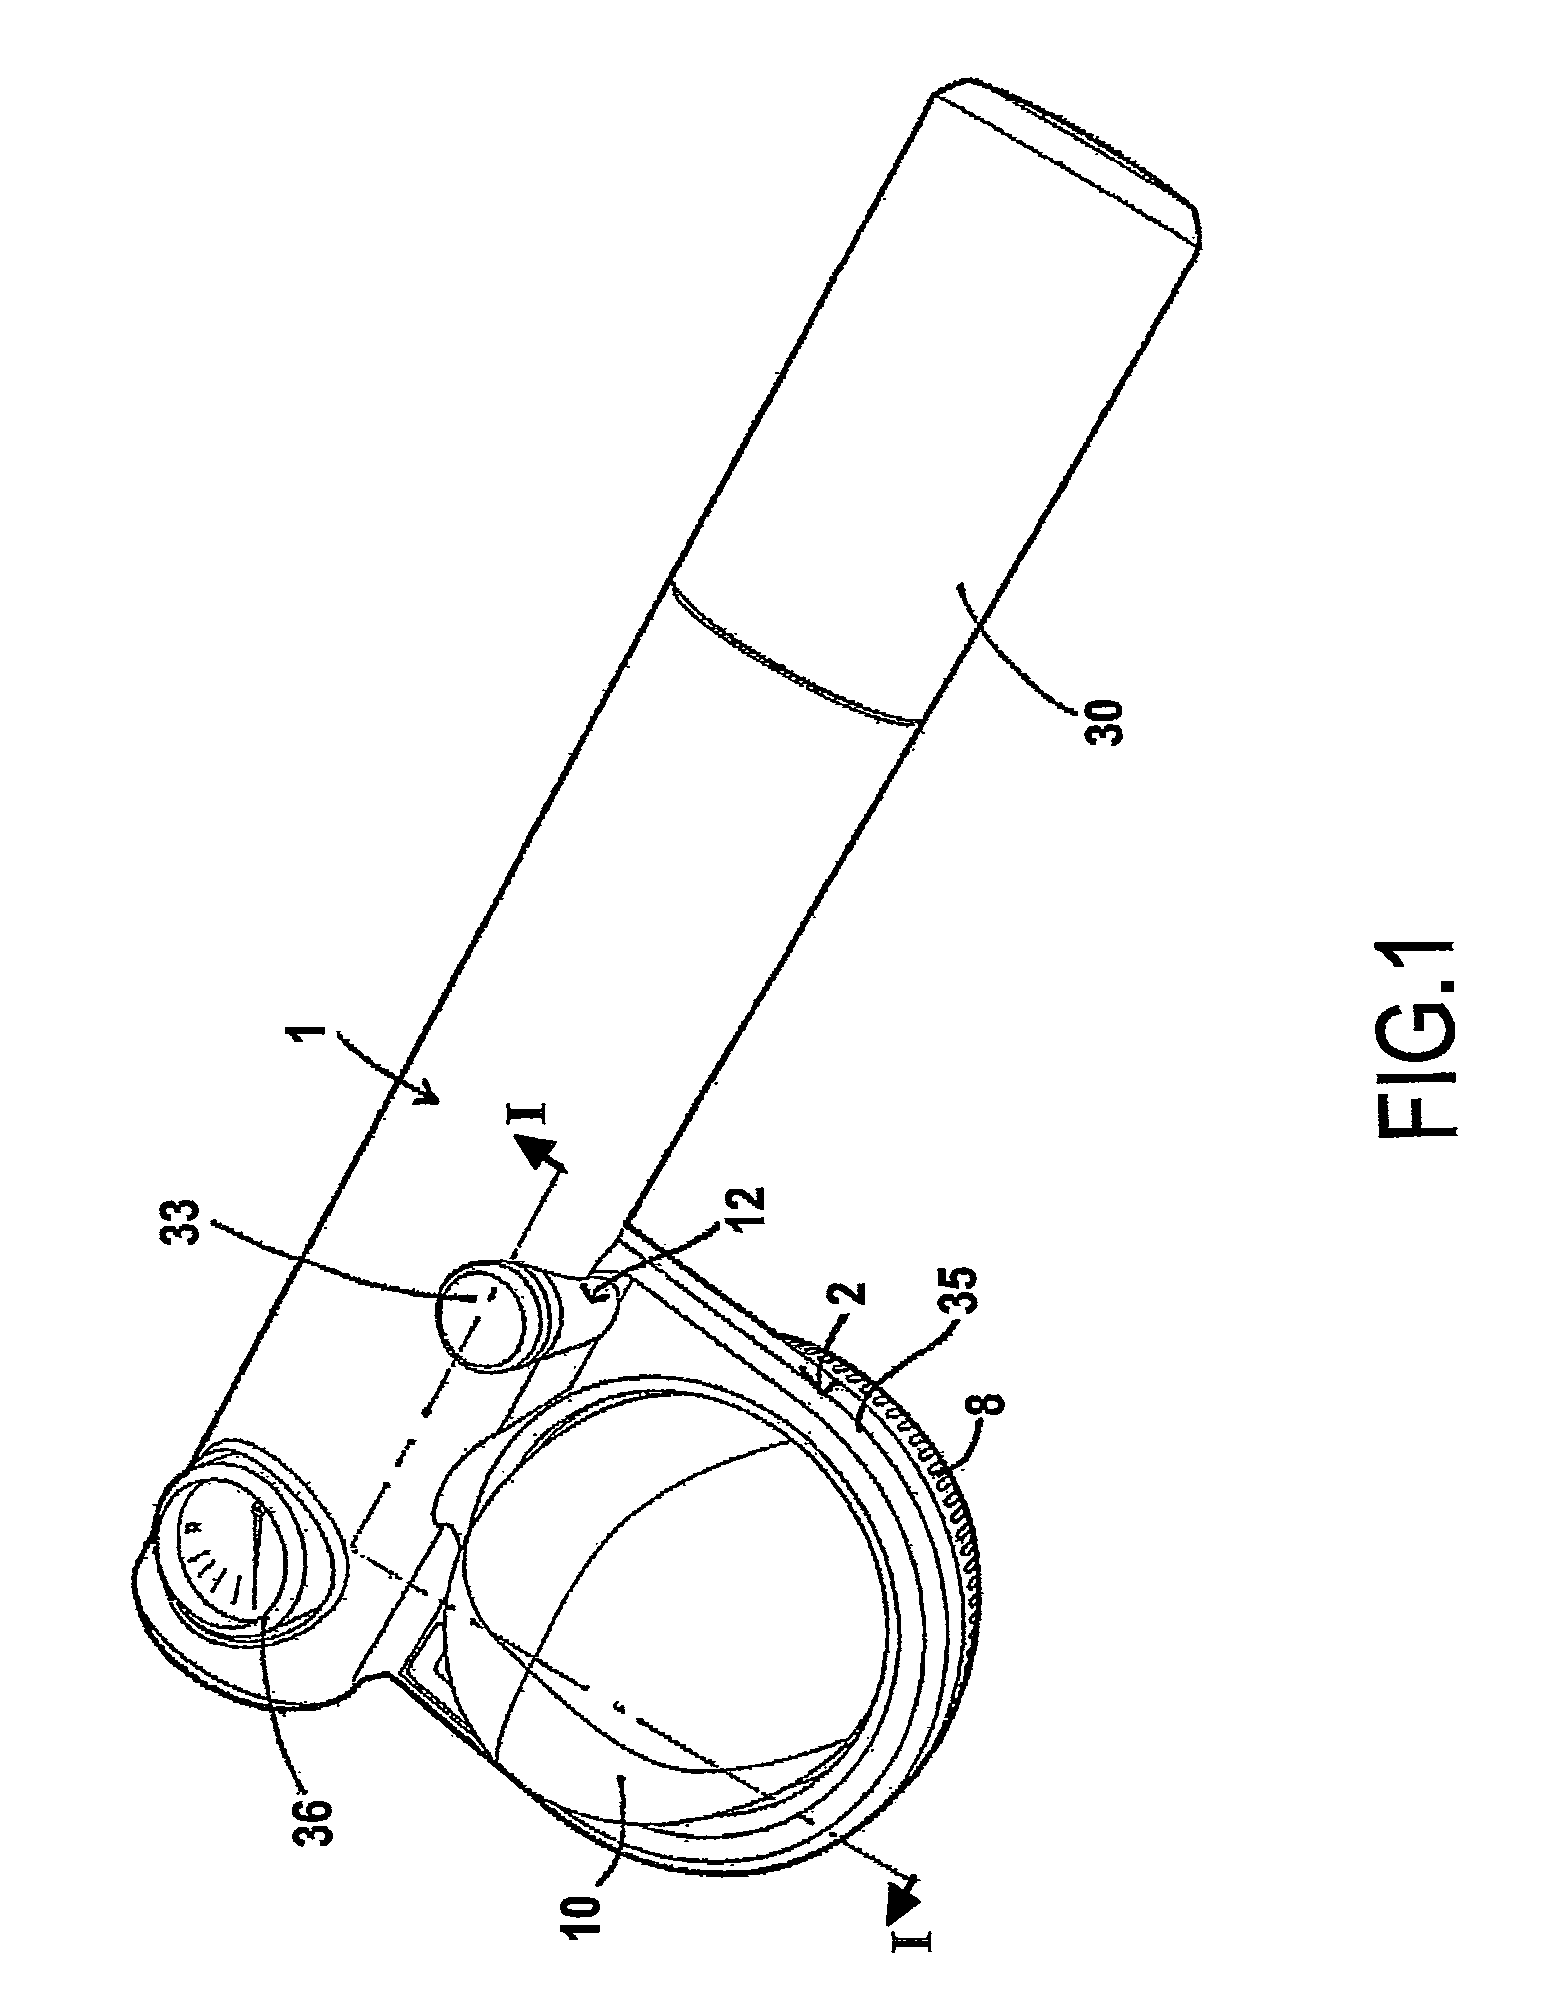 Apparatus for preparing an infusion